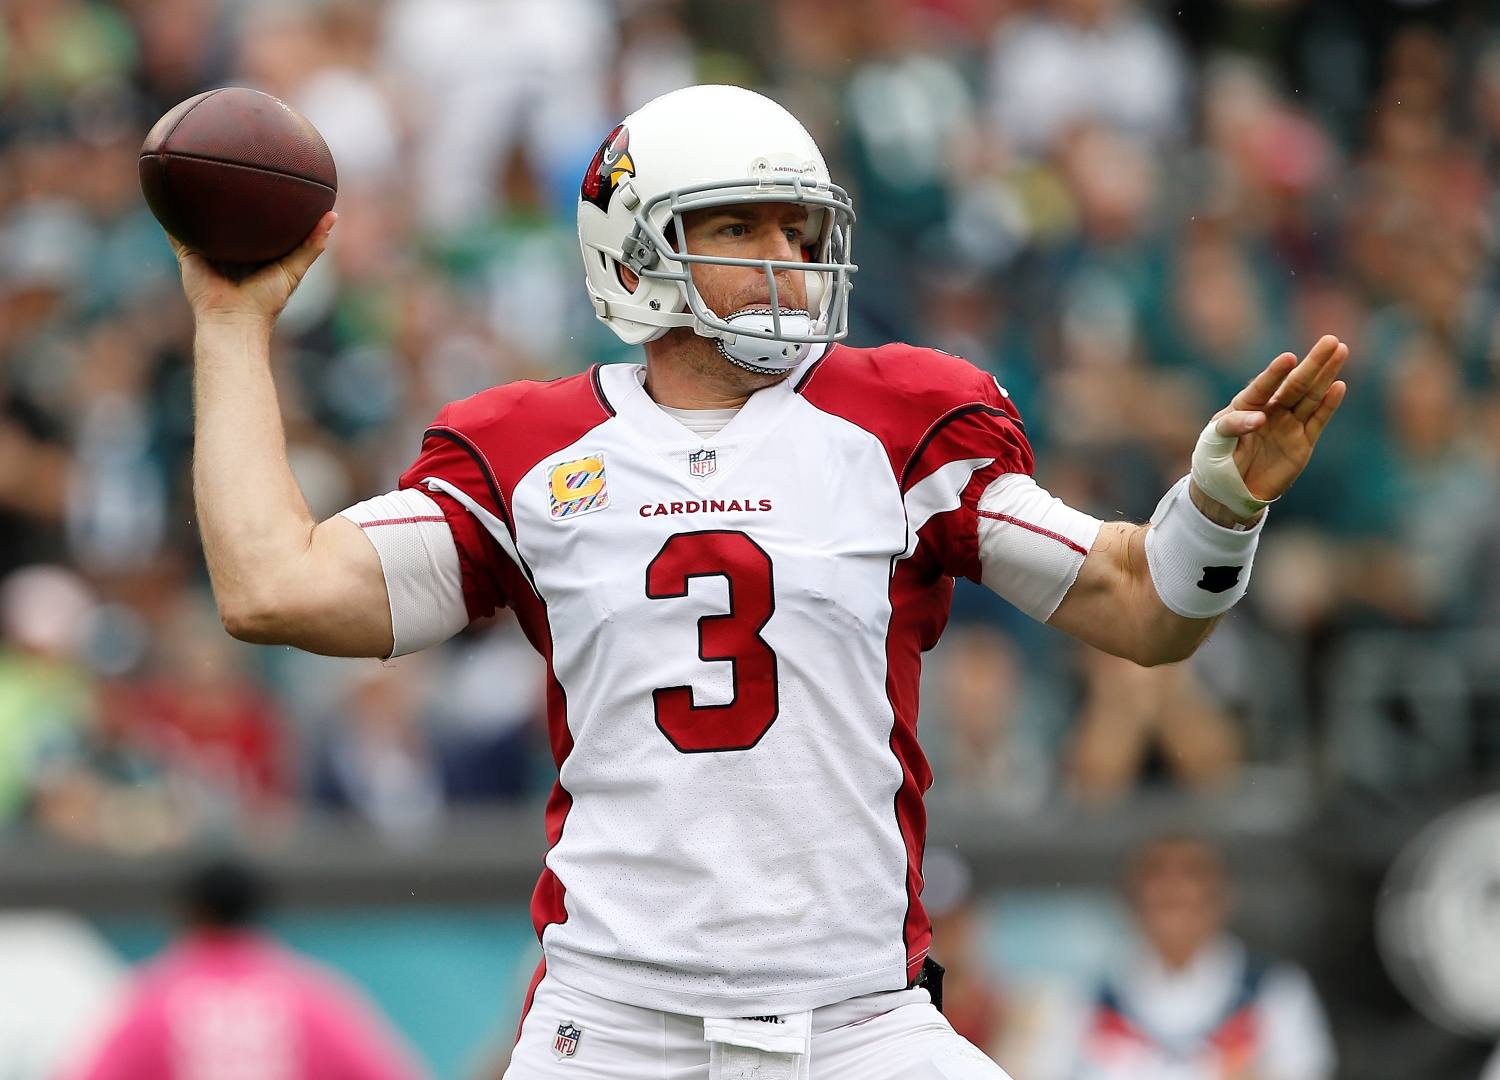 Carson Palmer Made 174 Million as an NFL Star Before He Found a New Way to Grow His Fortune